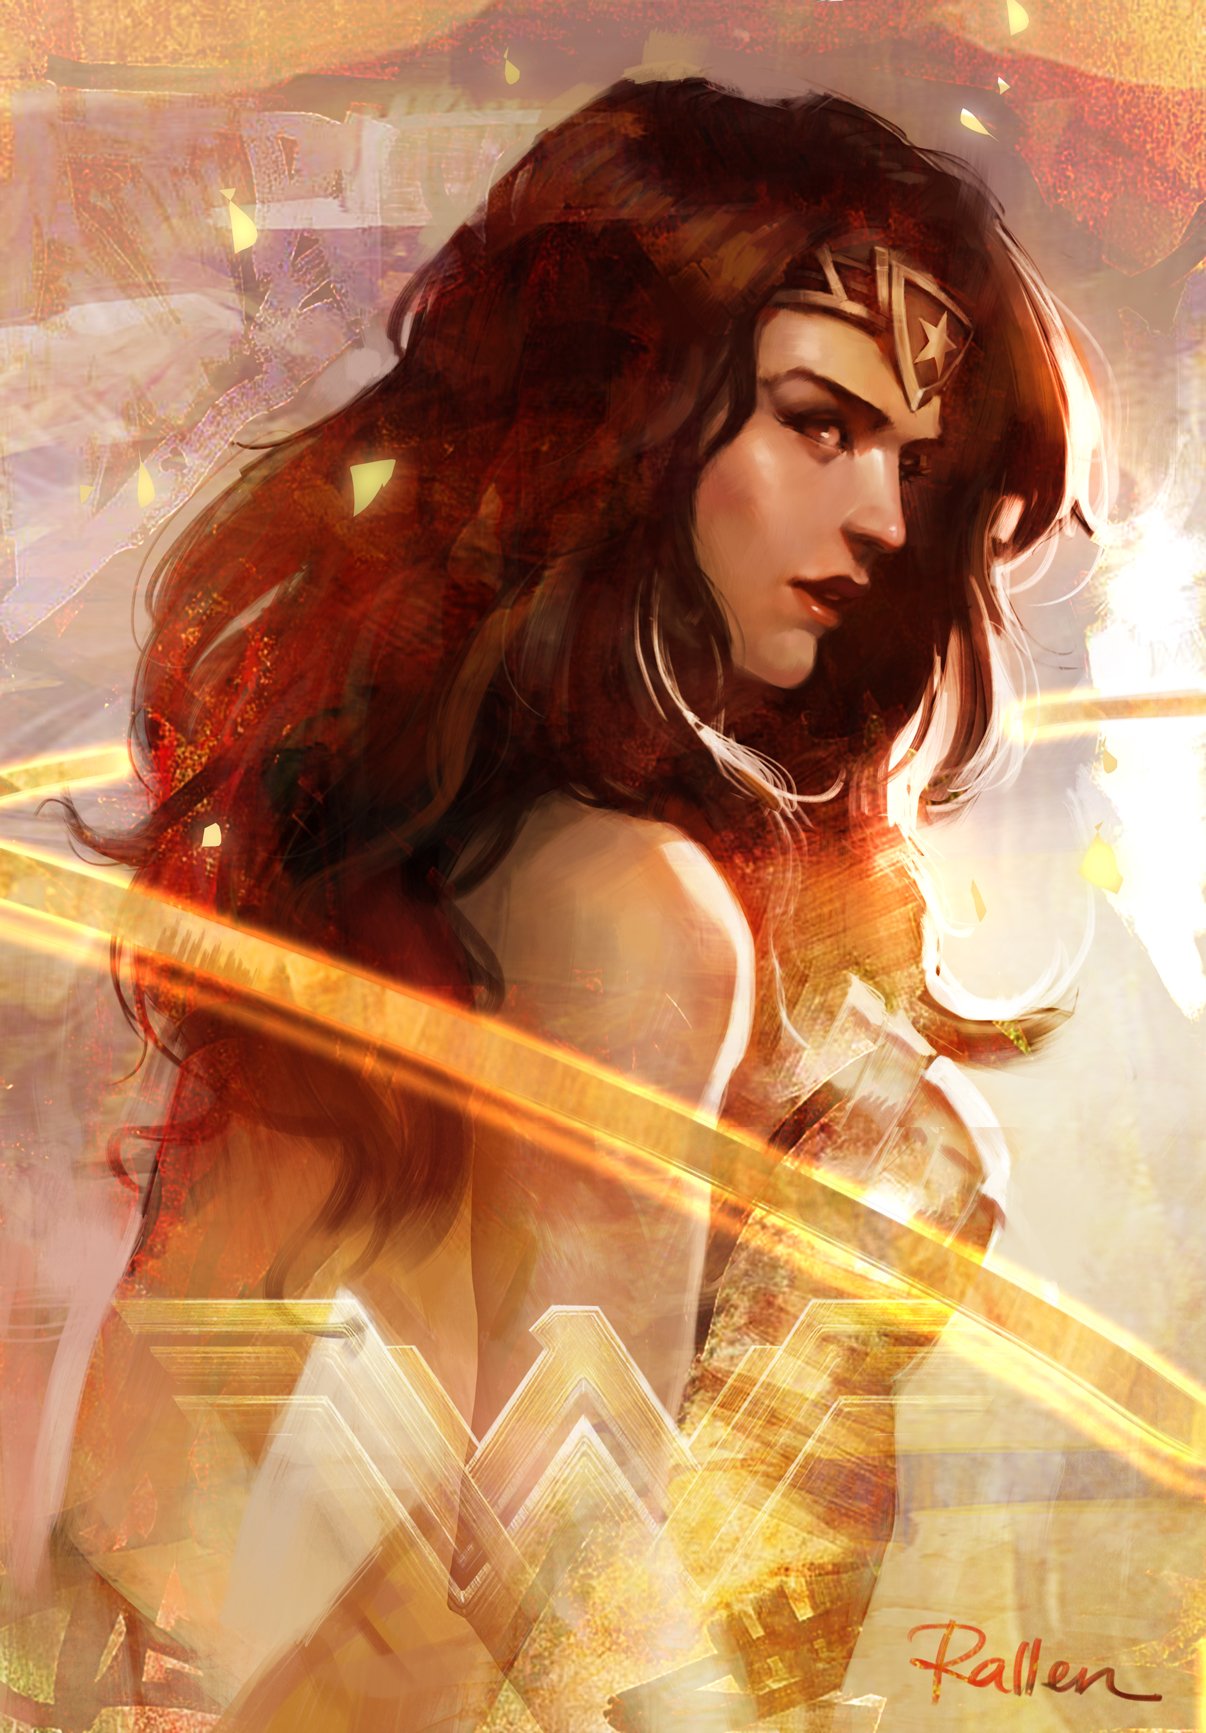 In a world of ordinary wallpapers, these are Wonder Woman wallpapers ...